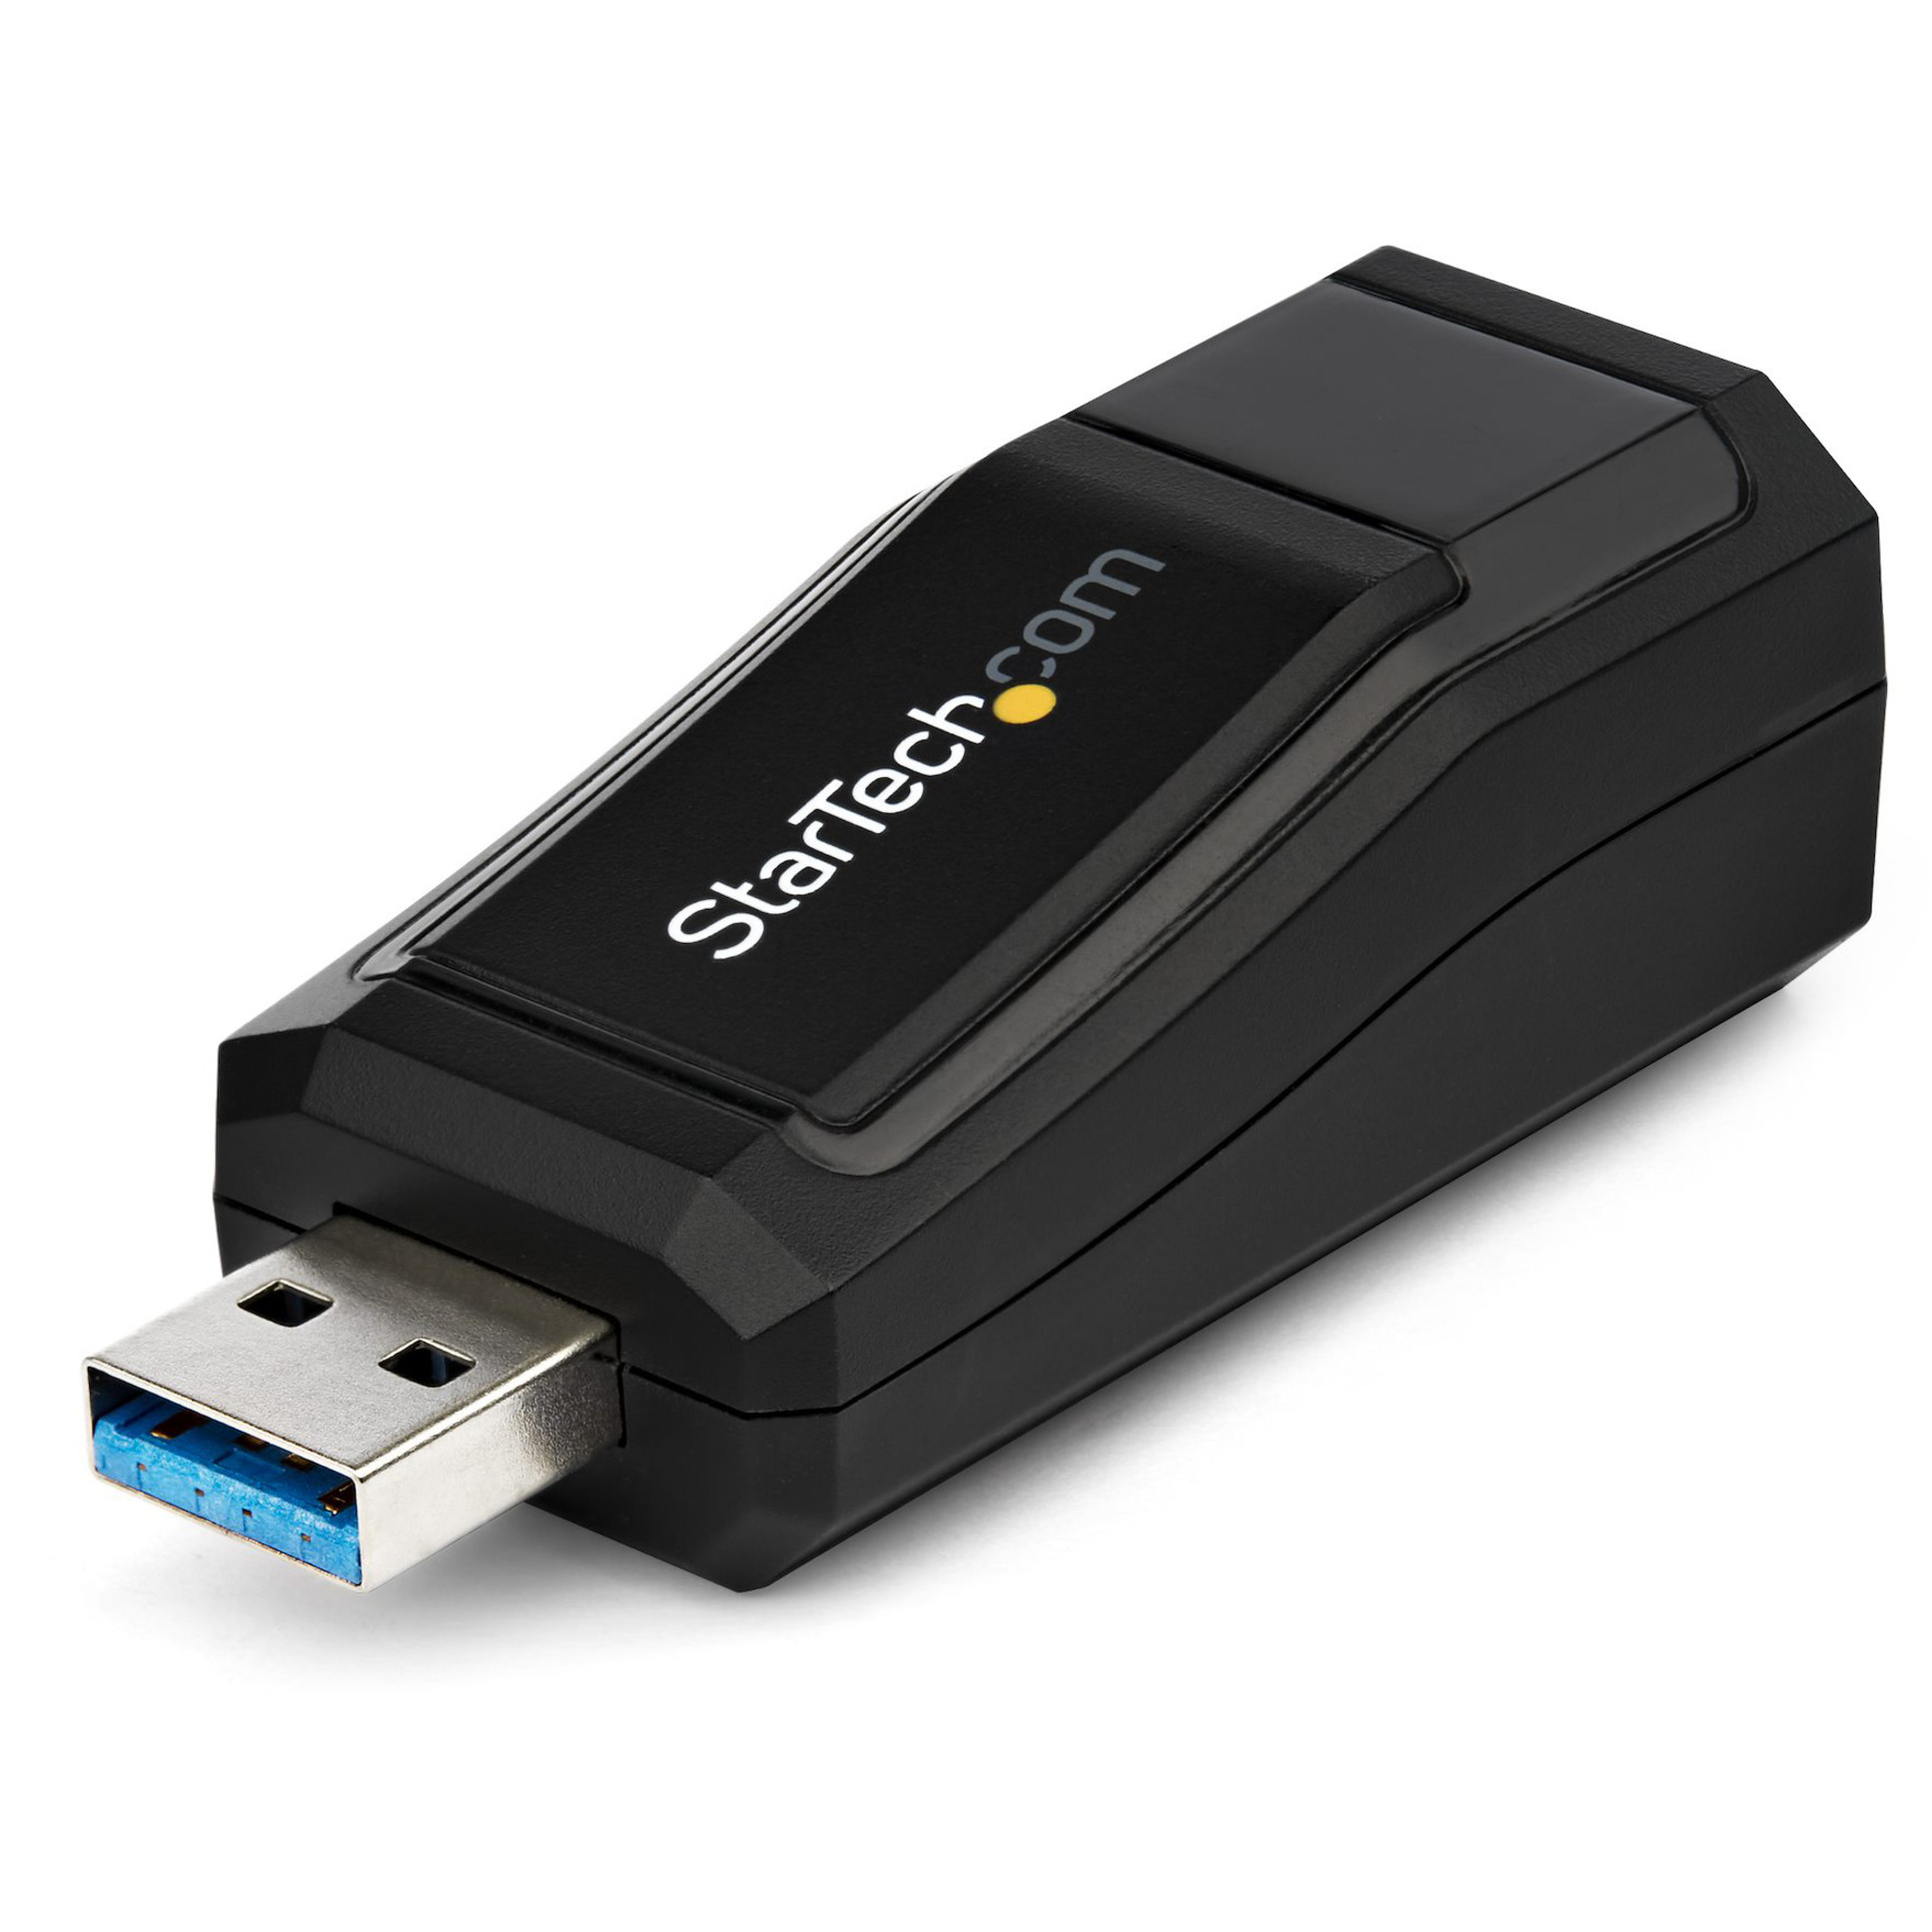 Startech .com USB 3.0 to Gigabit Ethernet NIC Network Adapter ? 10/100/1000 MbpsAdd Gigabit Ethernet network connectivity to a Laptop or D… USB31000NDS